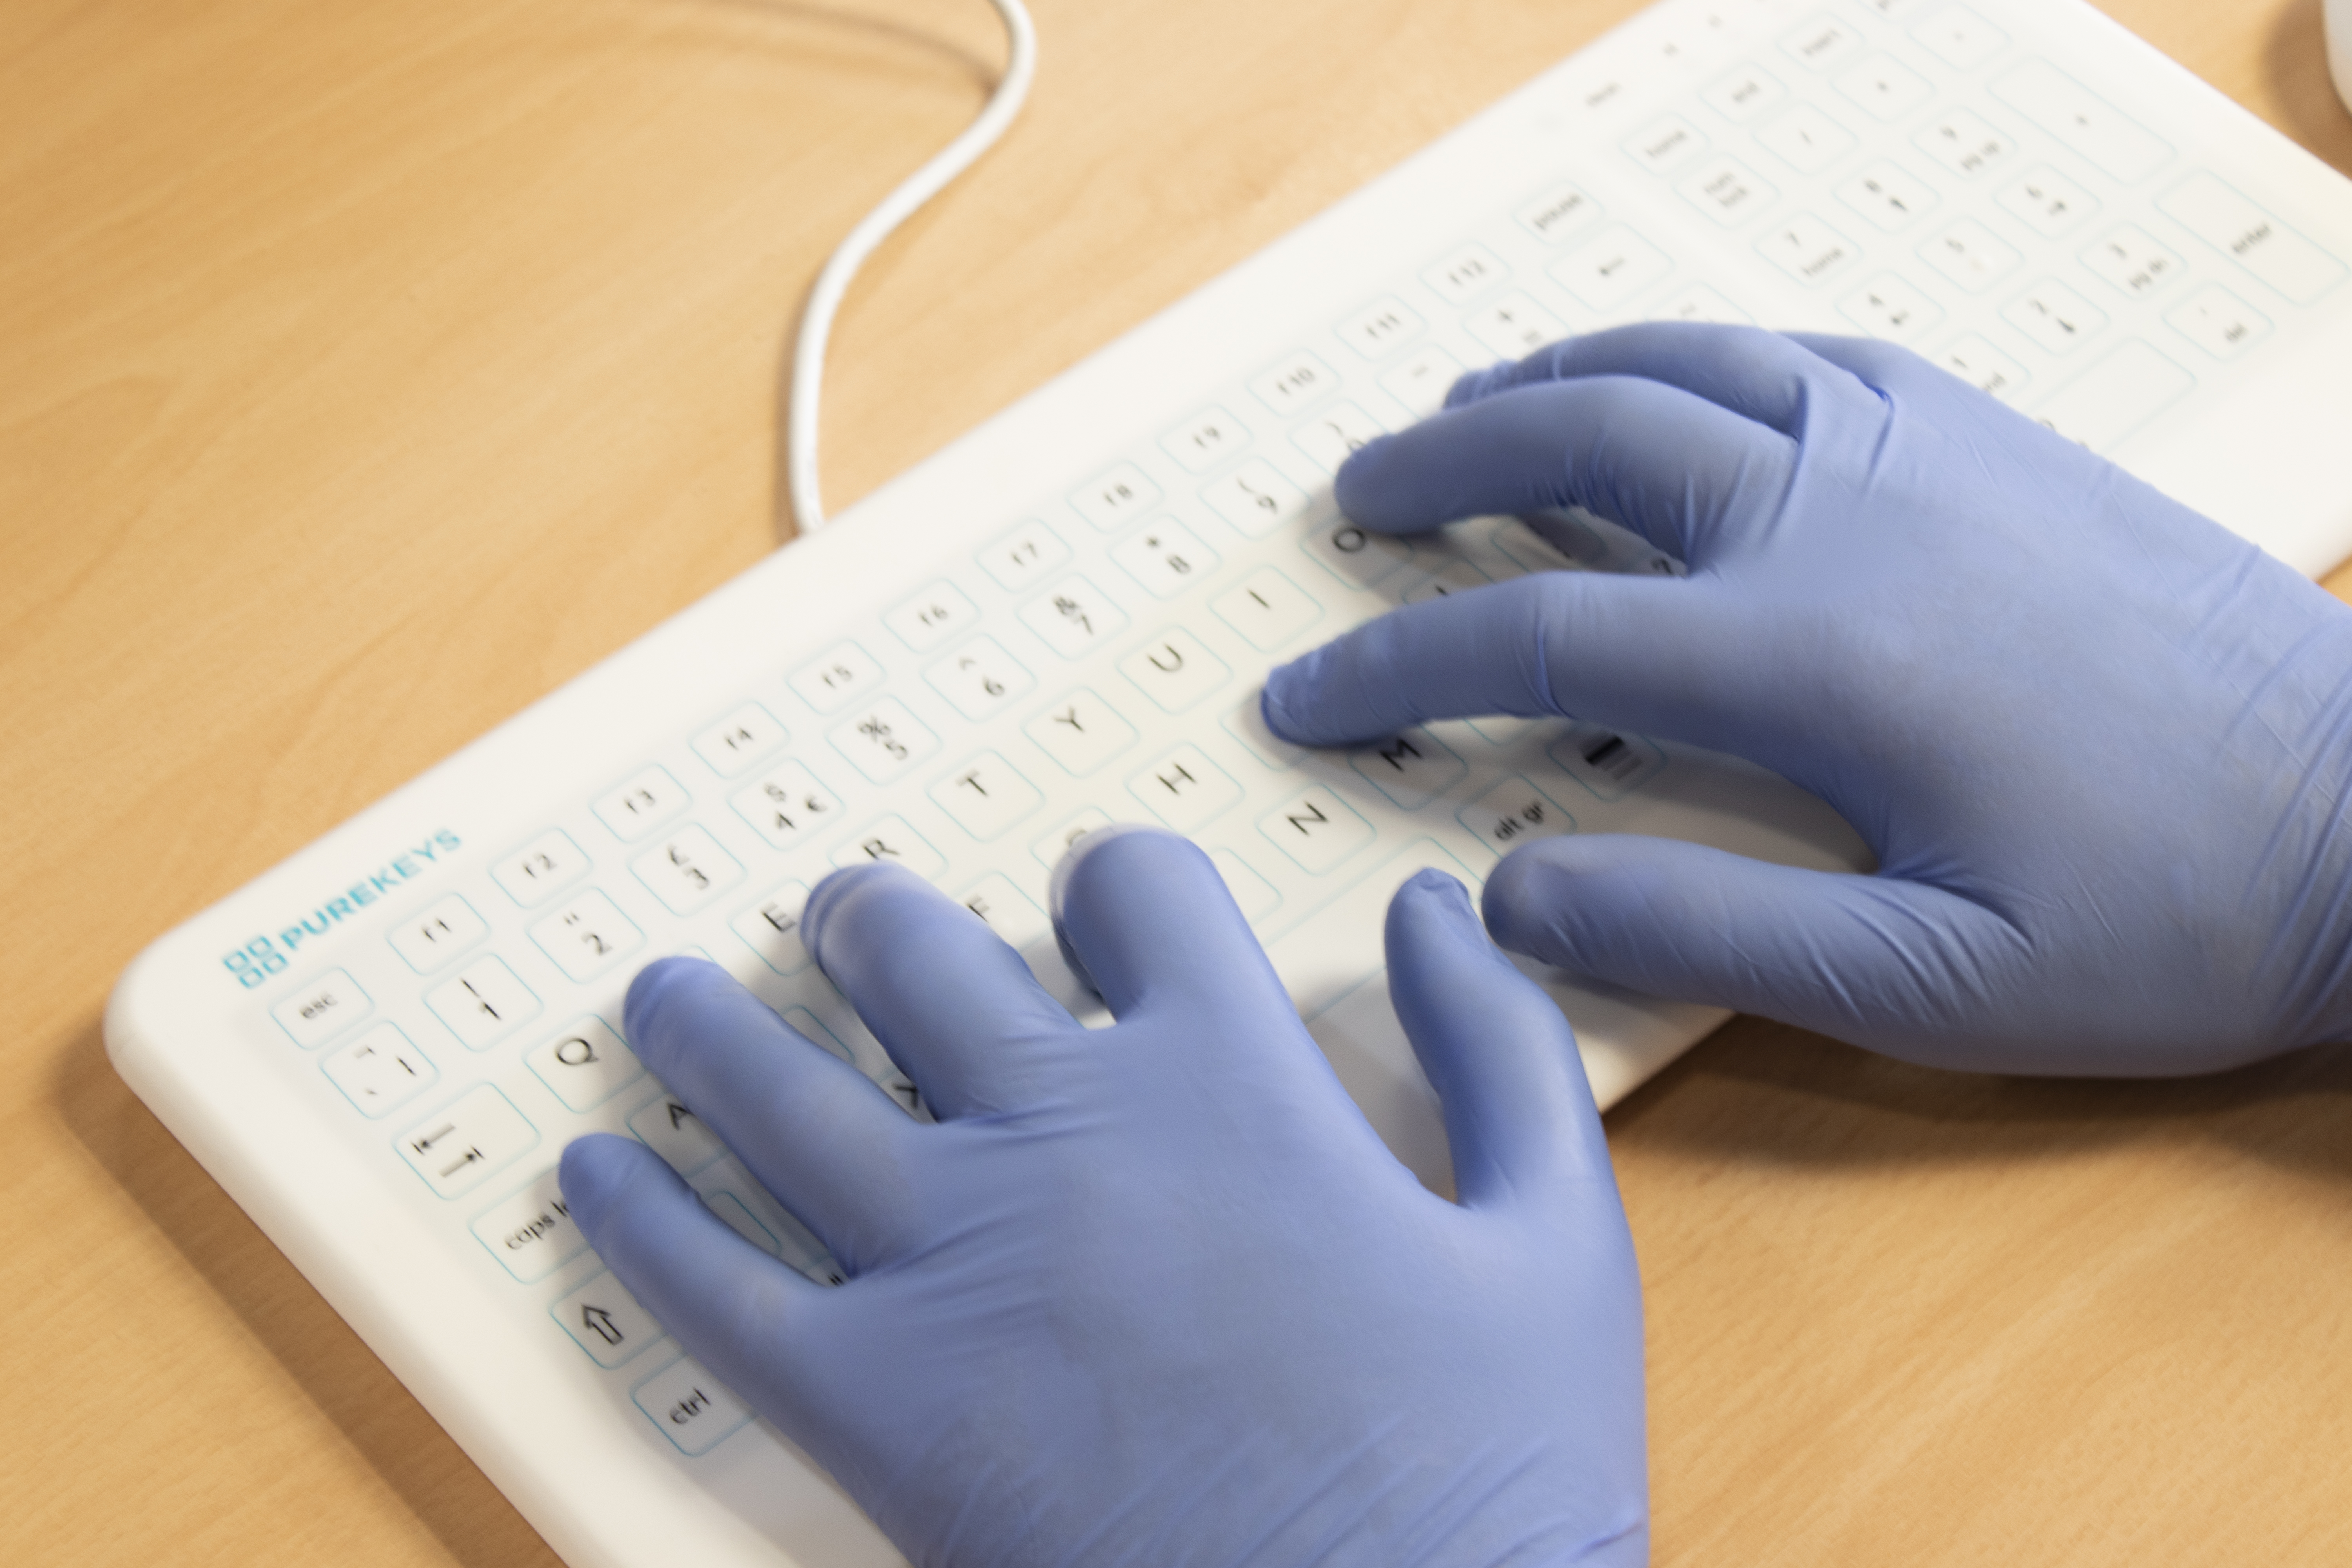 Purekeys Keyboards Prevent Infection from Spreading